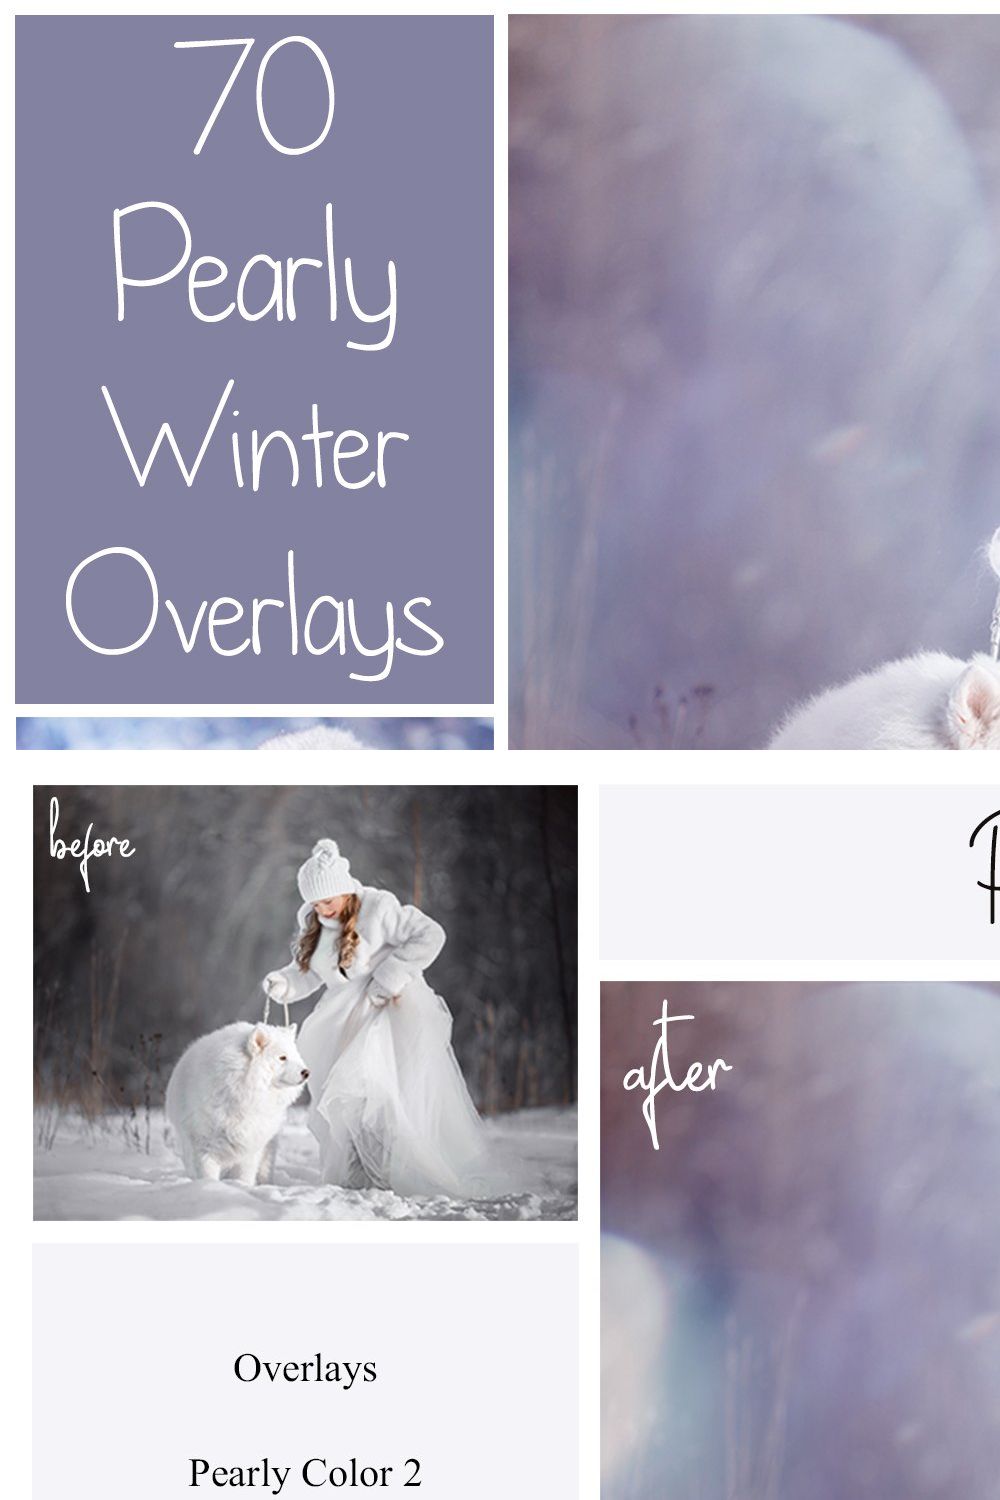 70 Pearly Winter Overlays pinterest preview image.